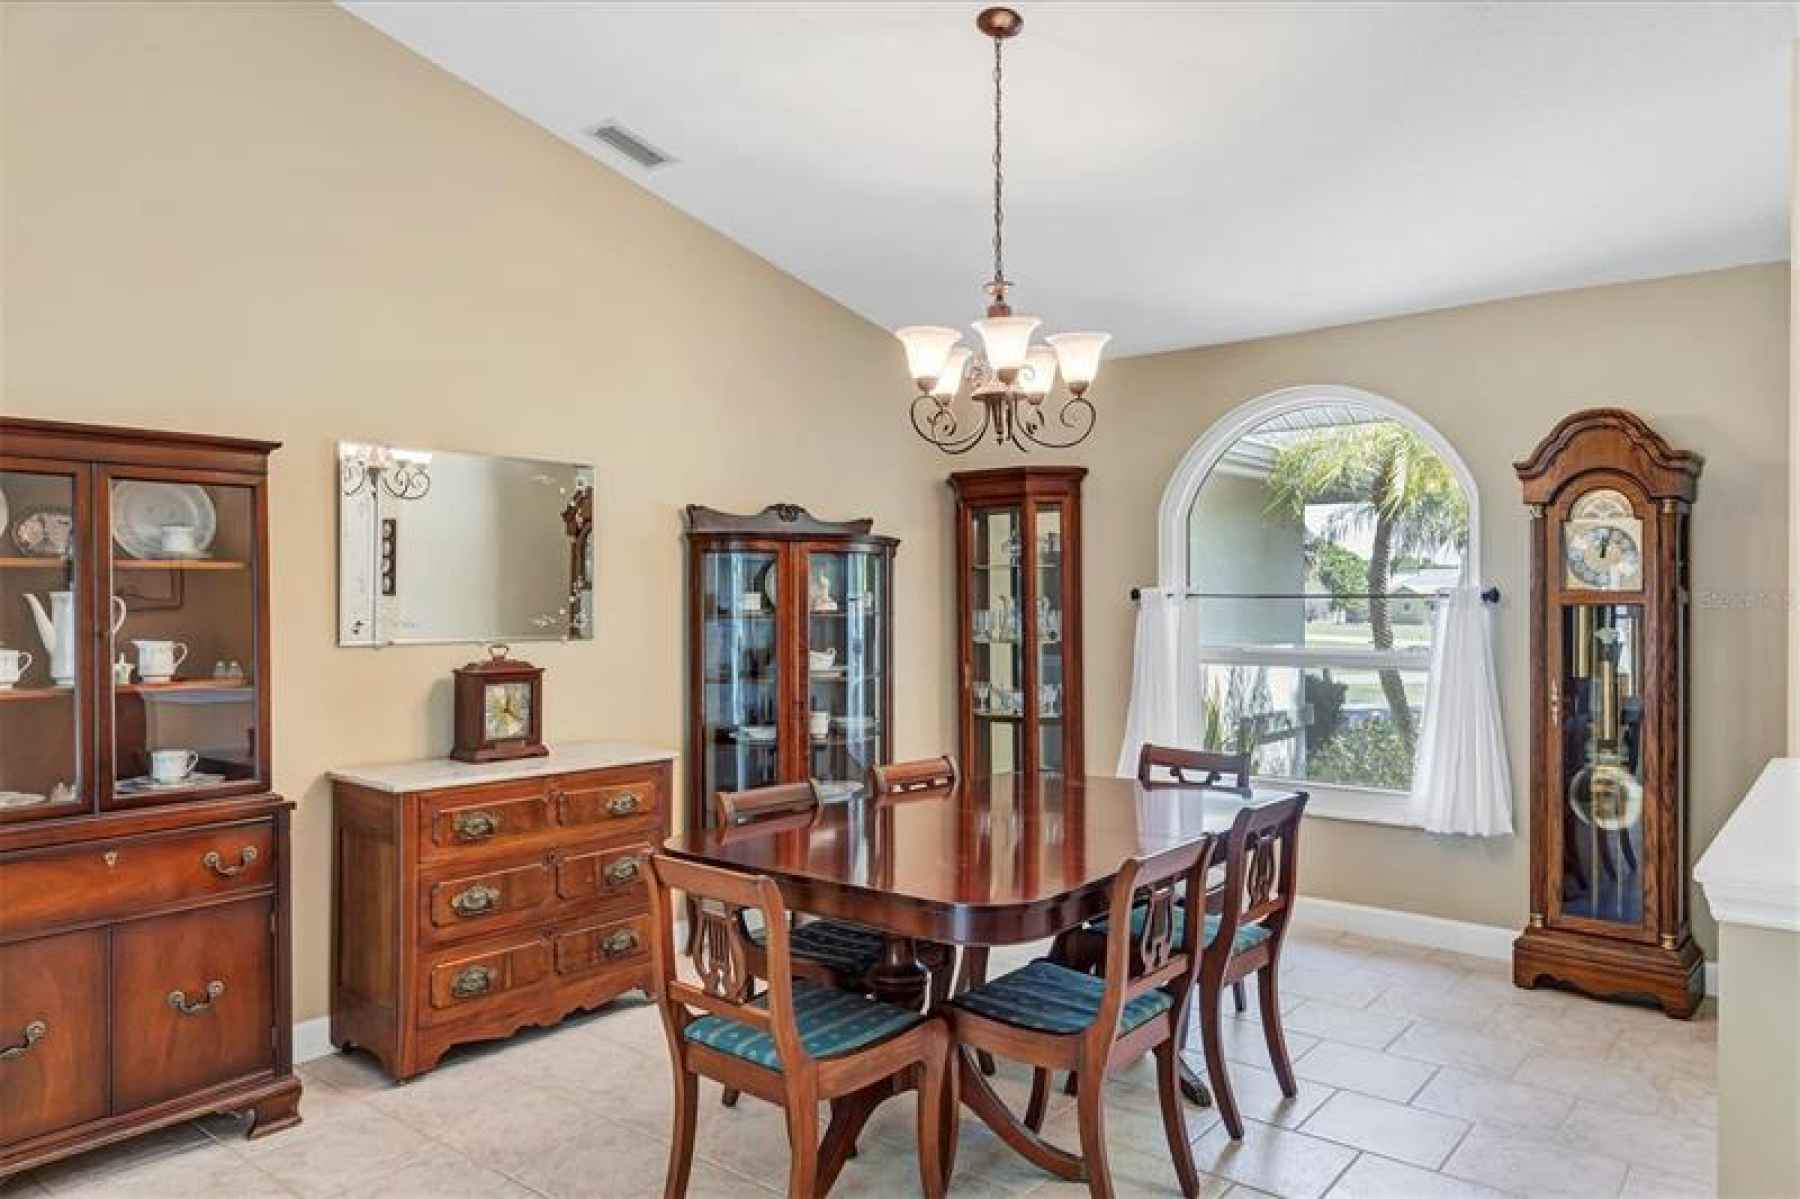 Large formal dining room with high ceilings